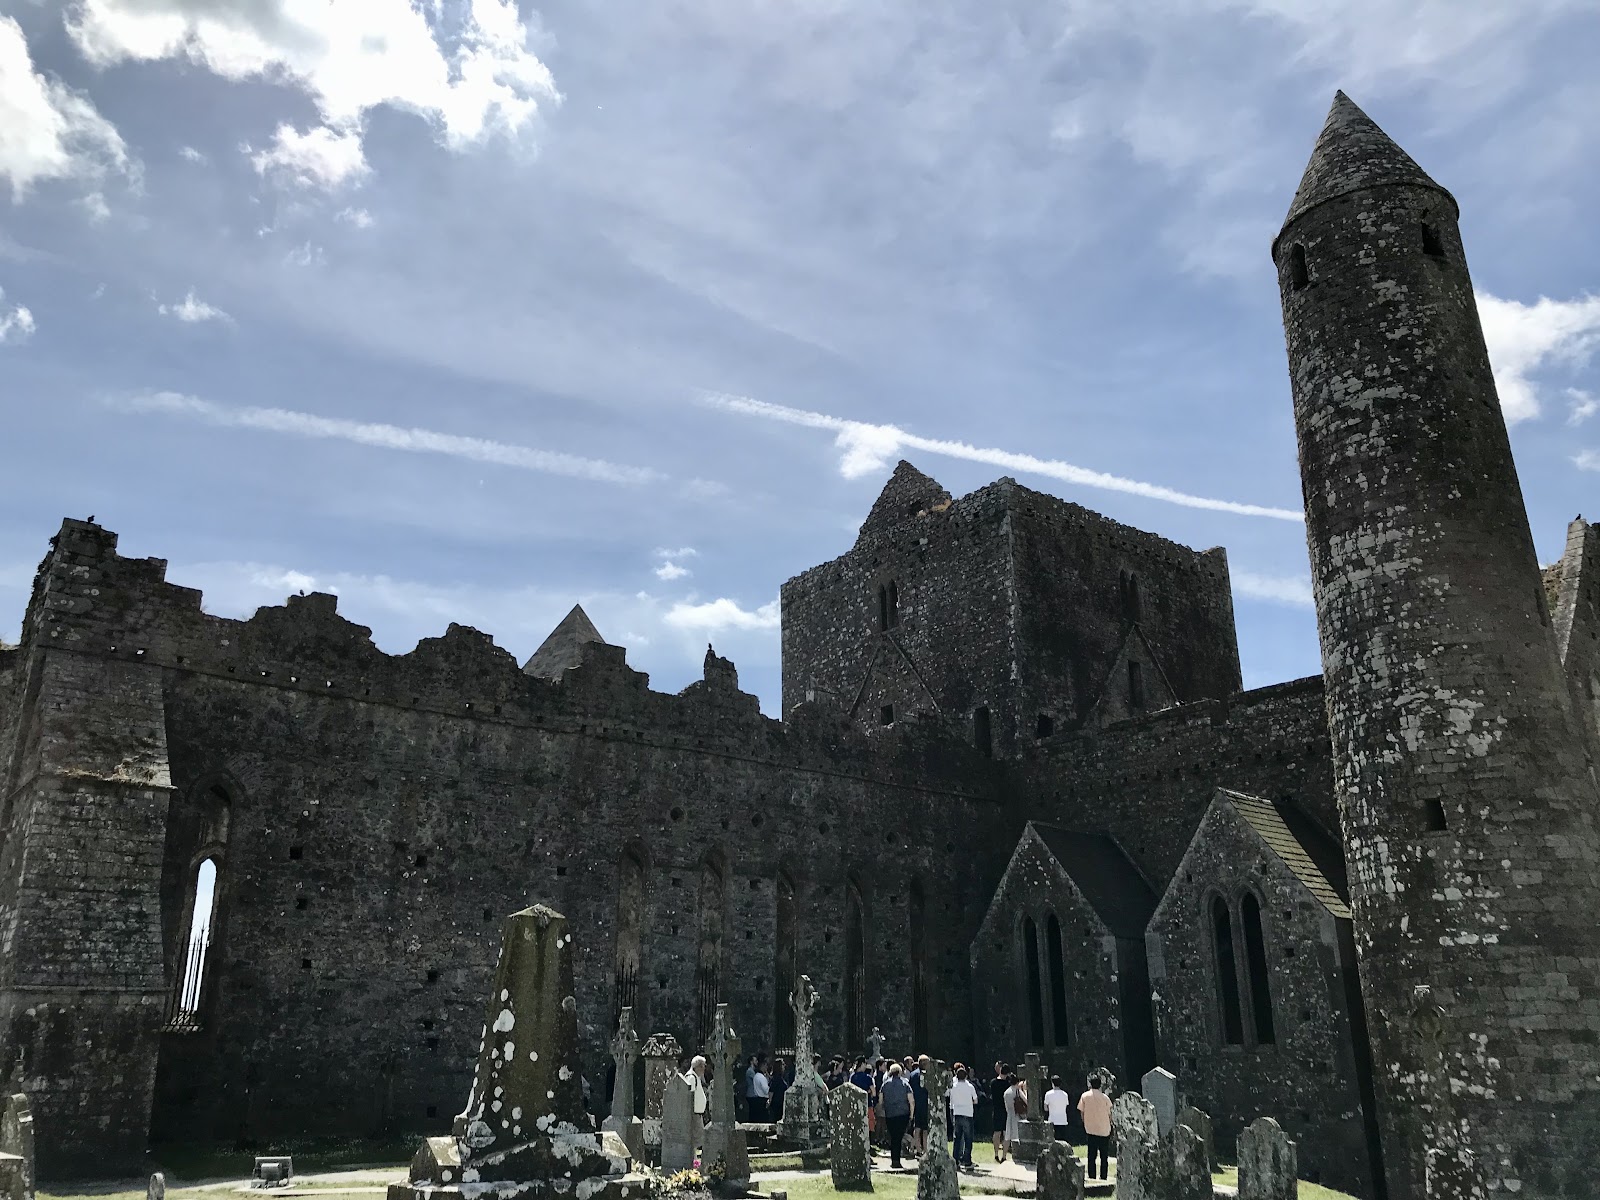 castles in southern ireland